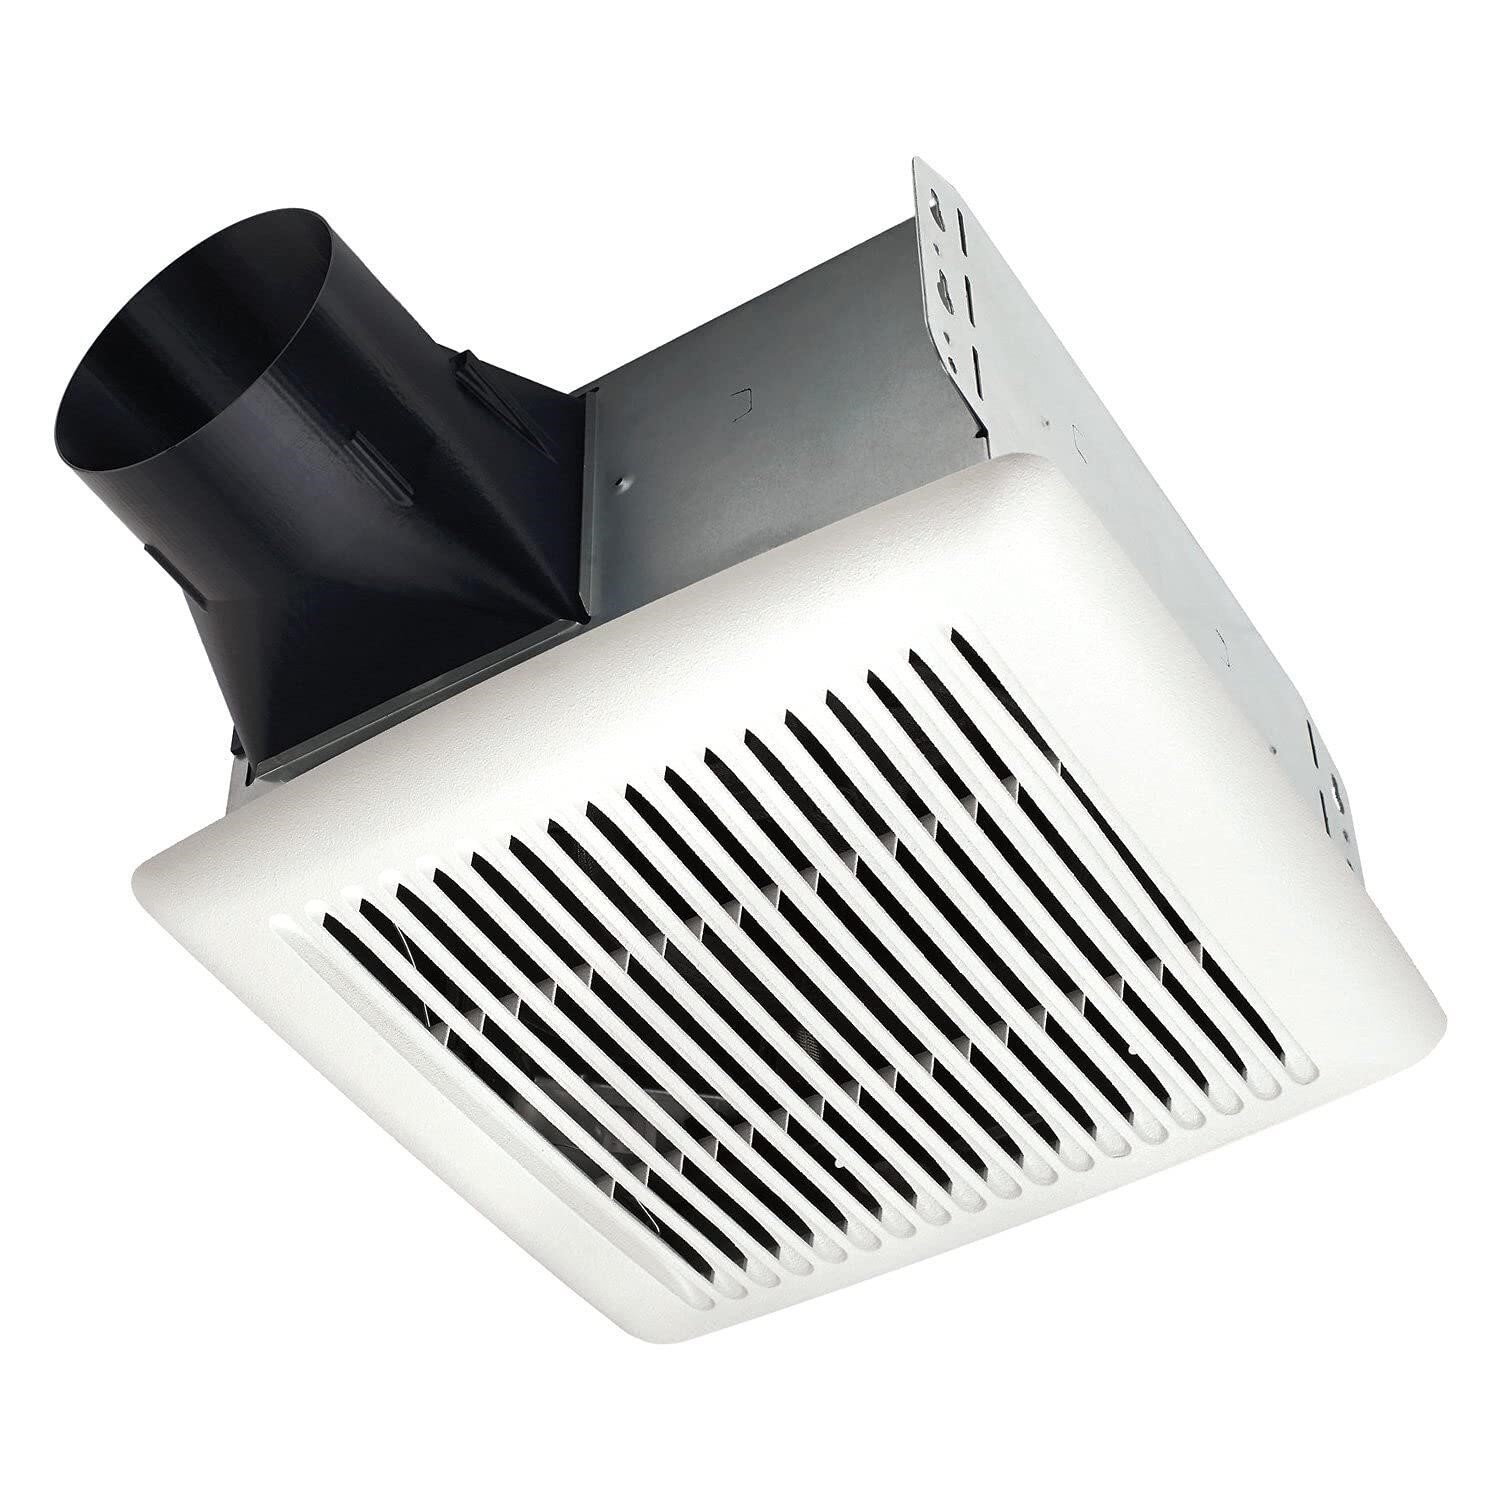 Broan-NuTone AE80BVentilation Fan with Roomside